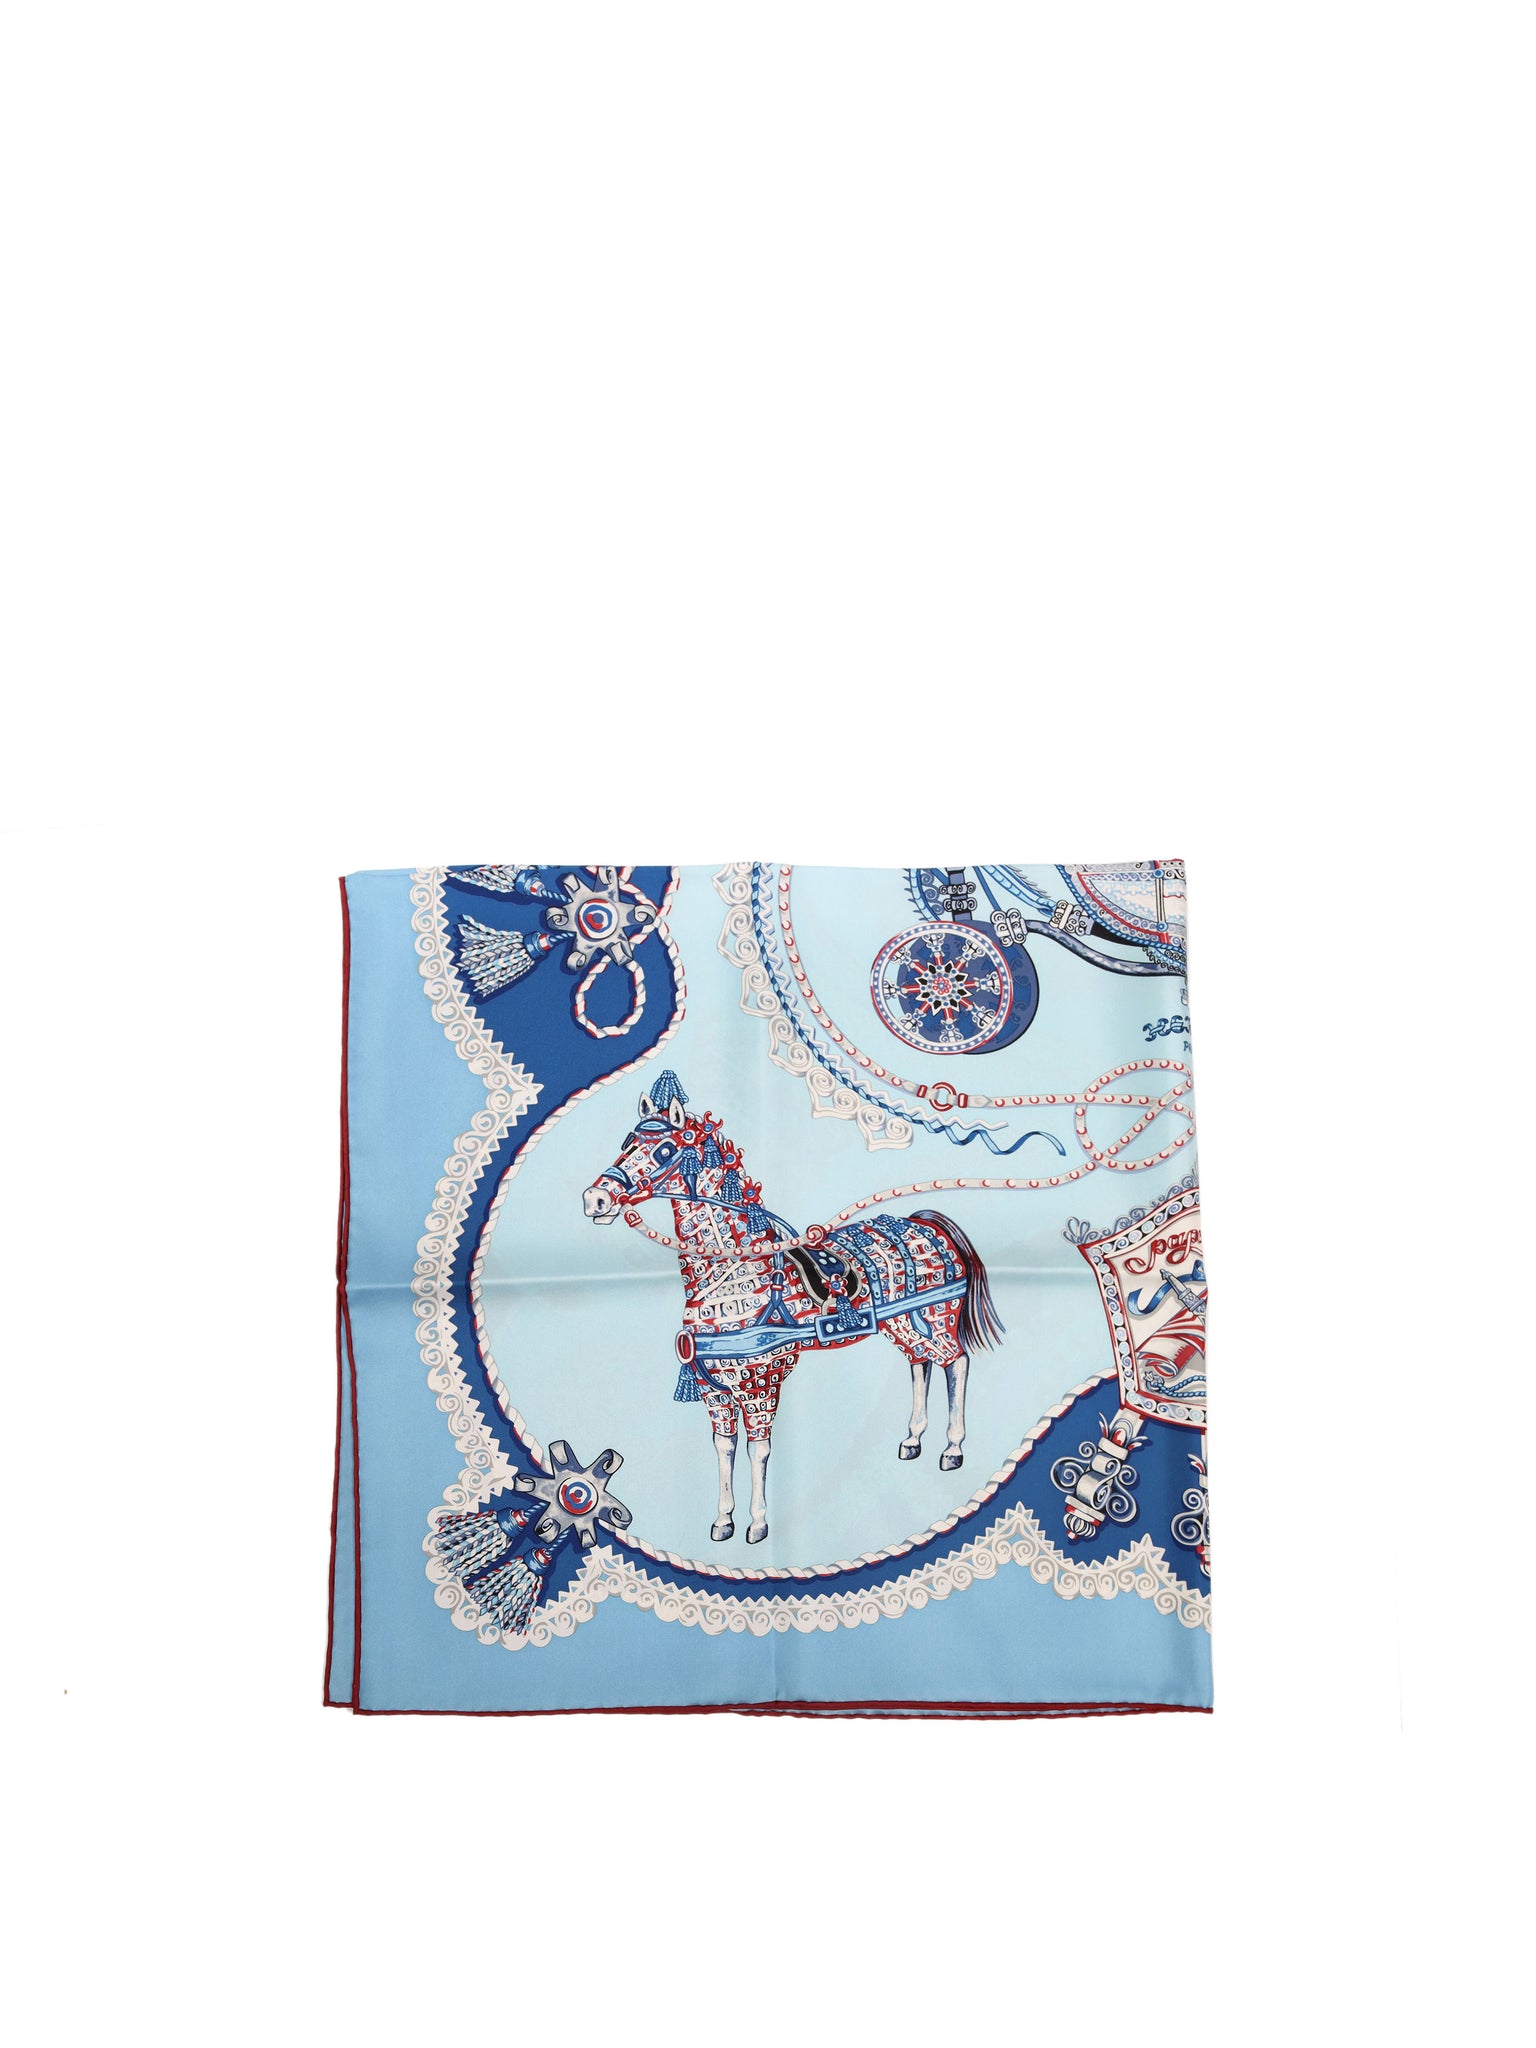 Hermes Scarf Paperoles 90 cm Silk black Carre horse carriage 35